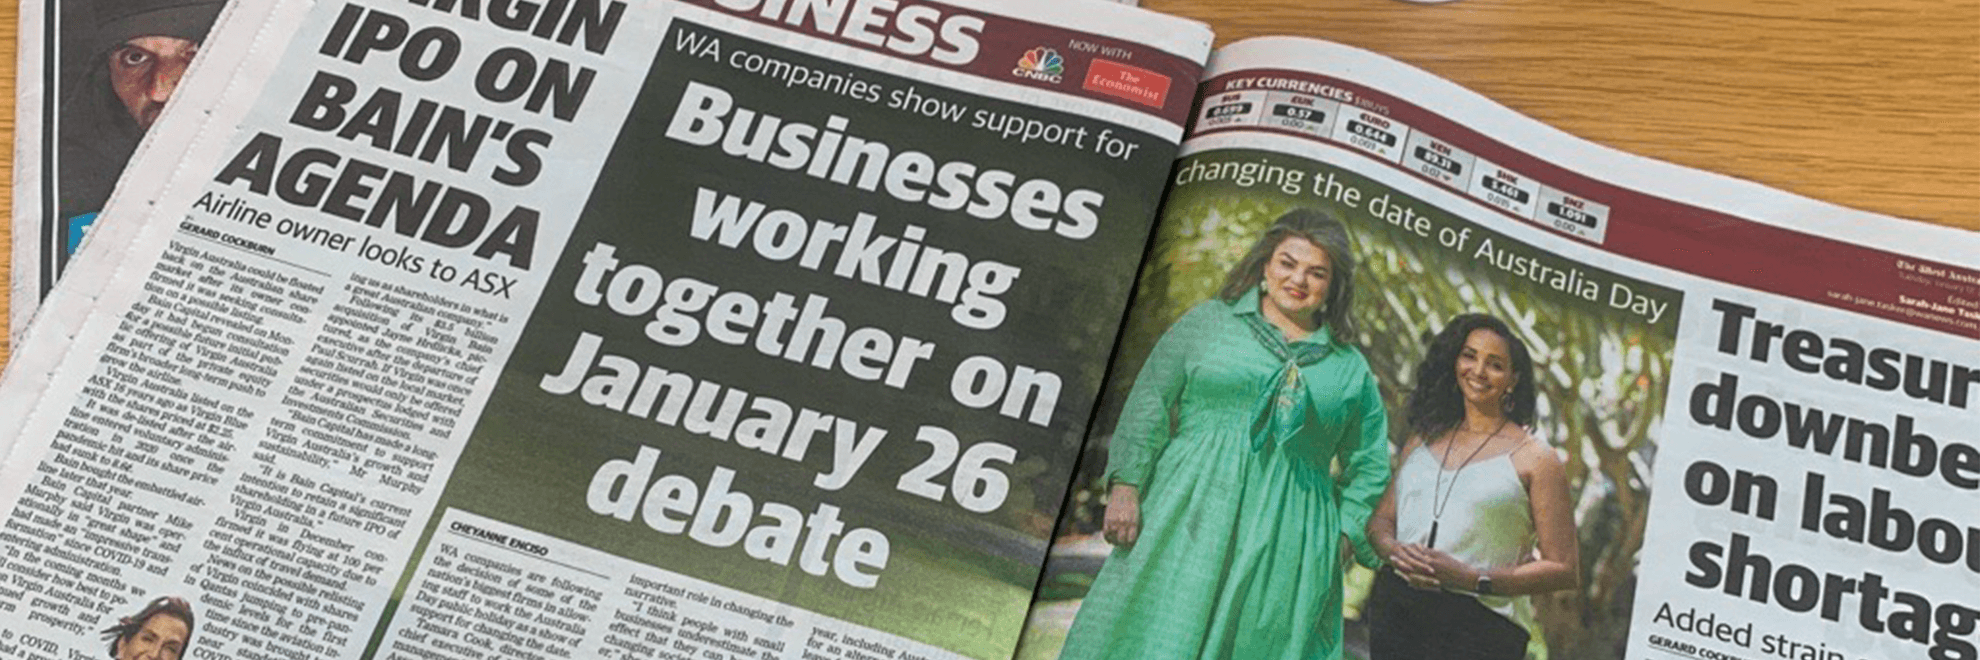 Photo of the news feature about WA companies show support for changing the date of Australia Day